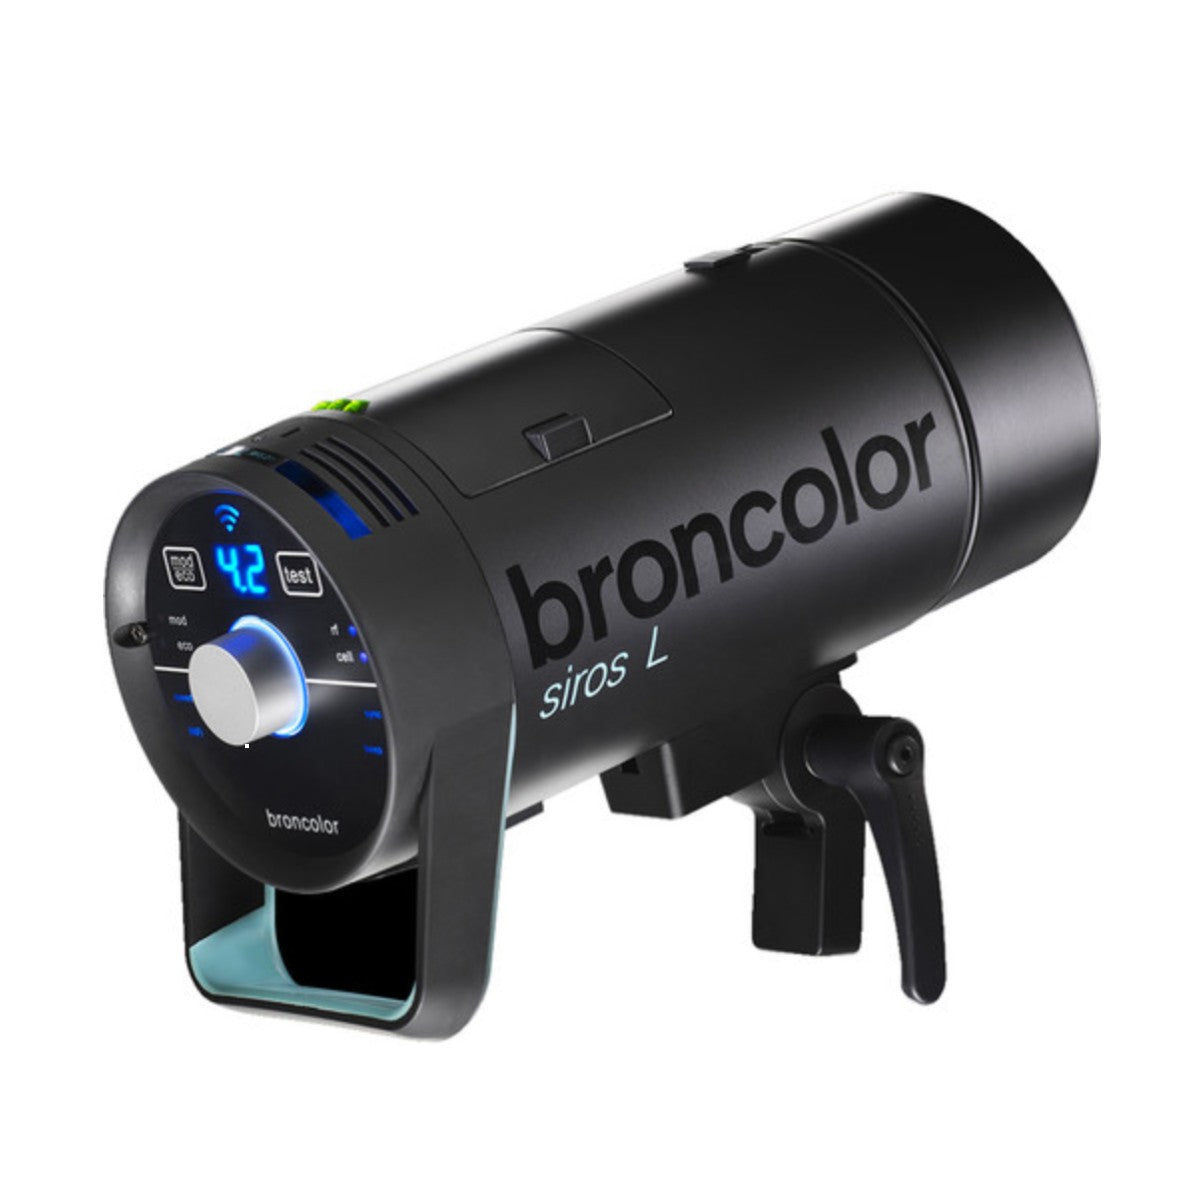 Broncolor Siros 400 L Battery-Powered Monolight